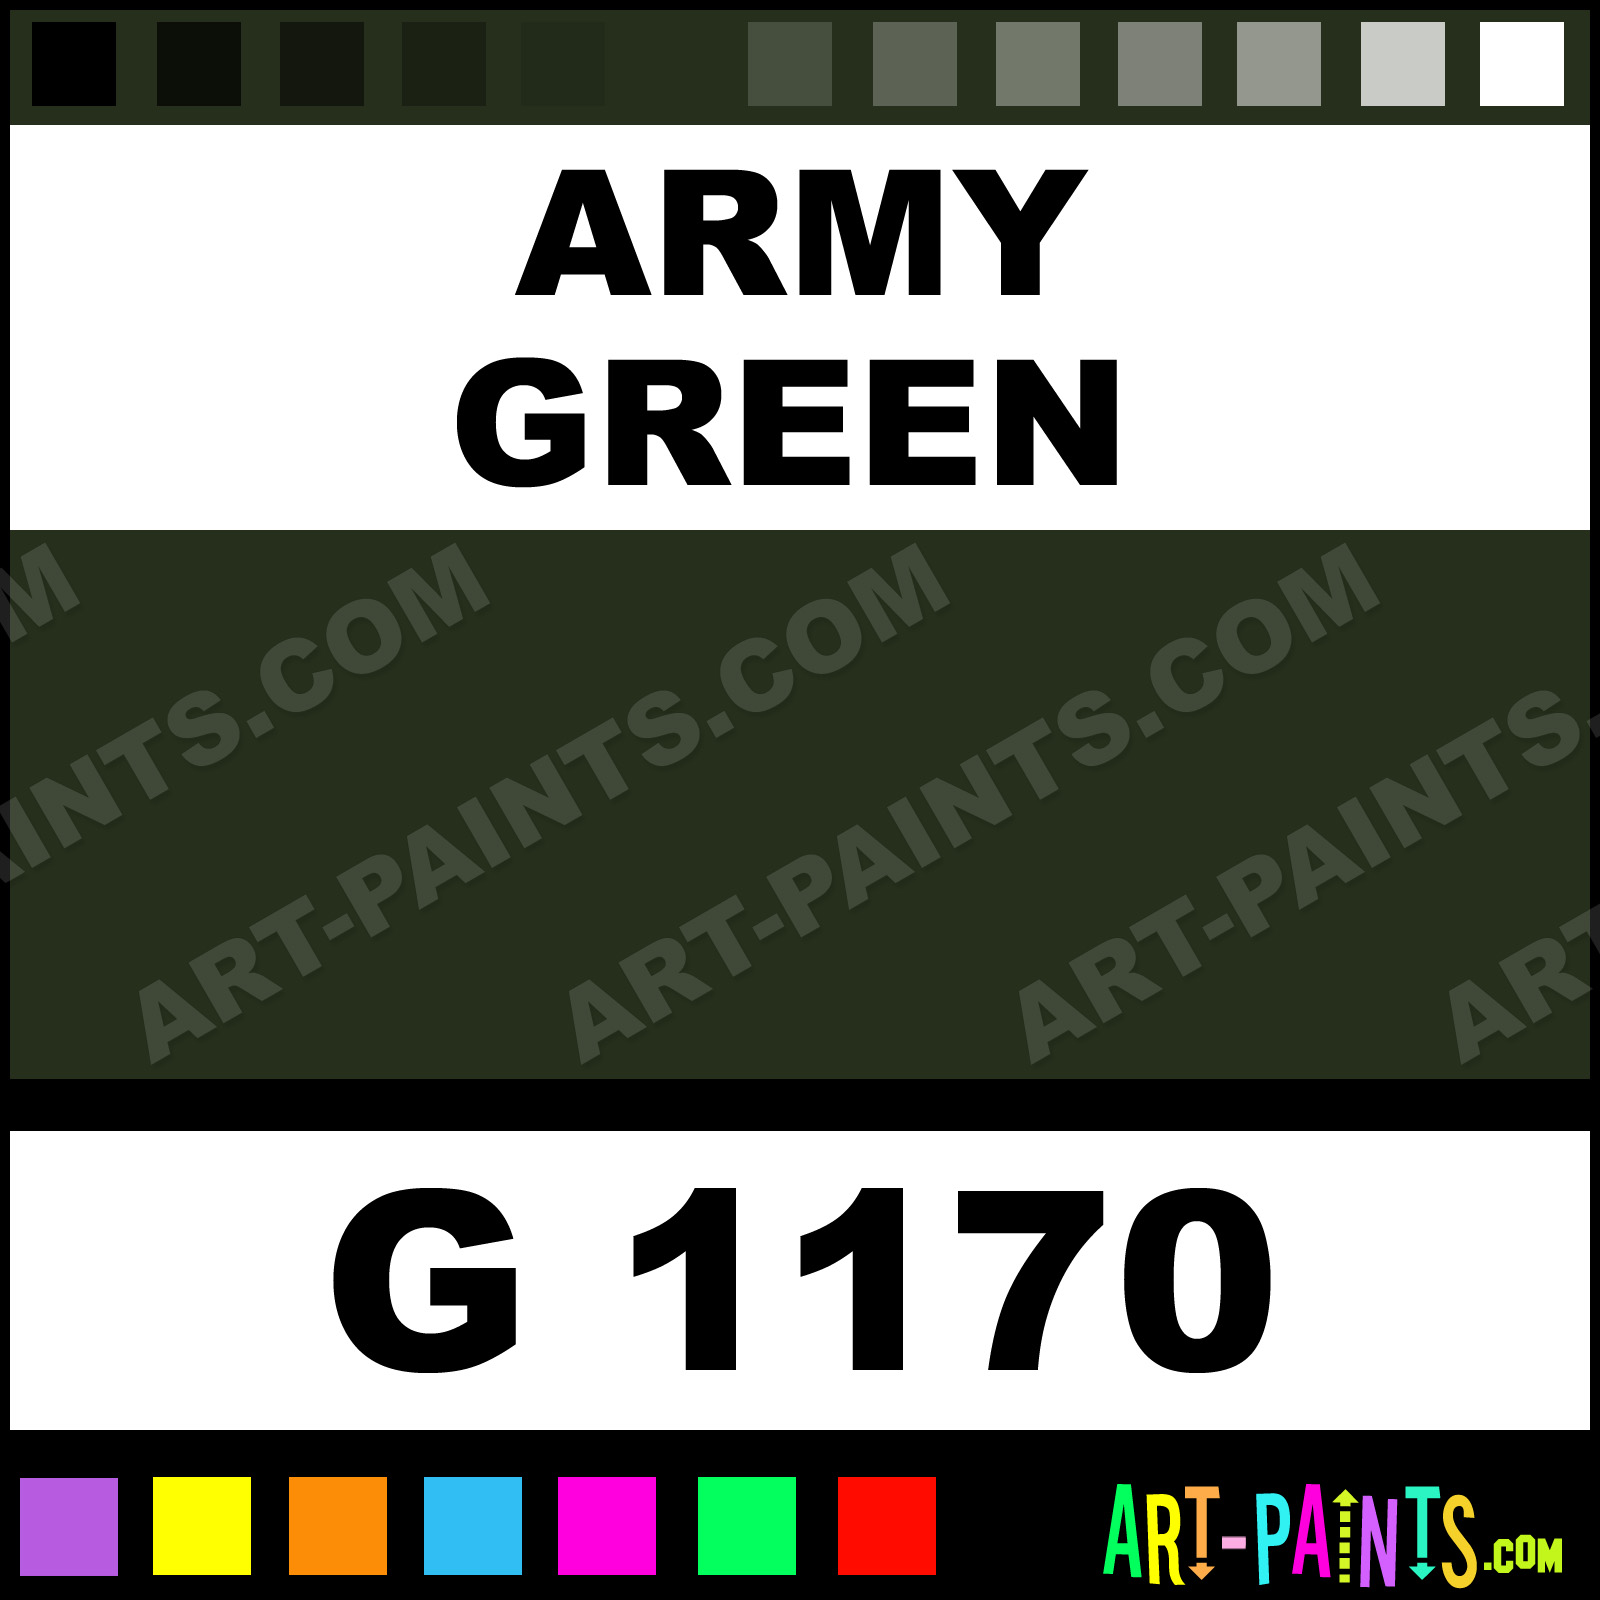 Montana Gold Spray Paint Olive Green